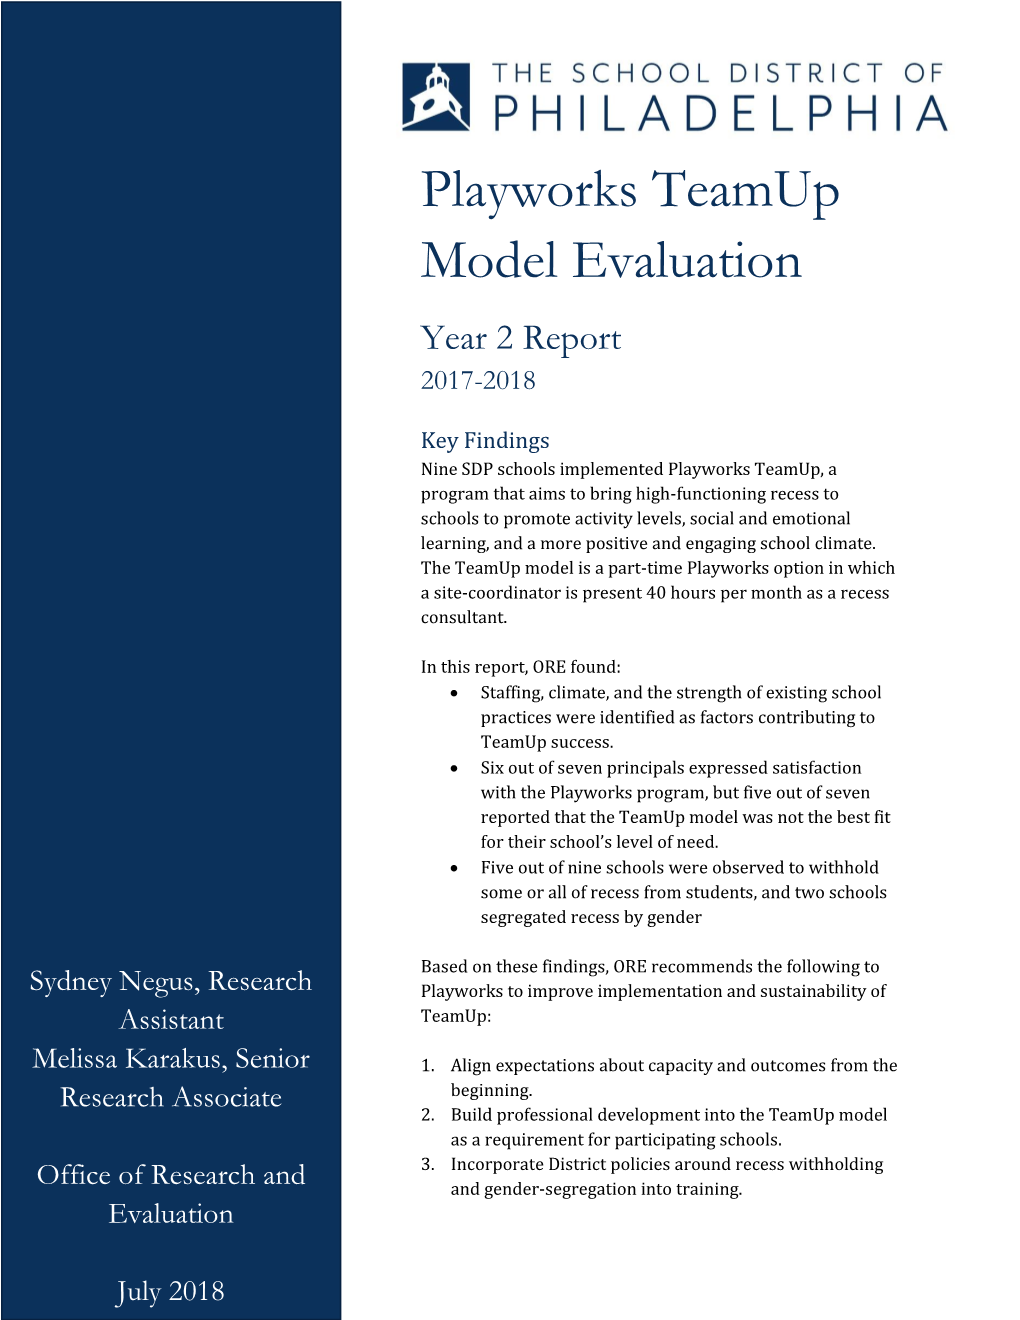 Playworks Teamup Model Evaluation Year 2 Report 2017-2018